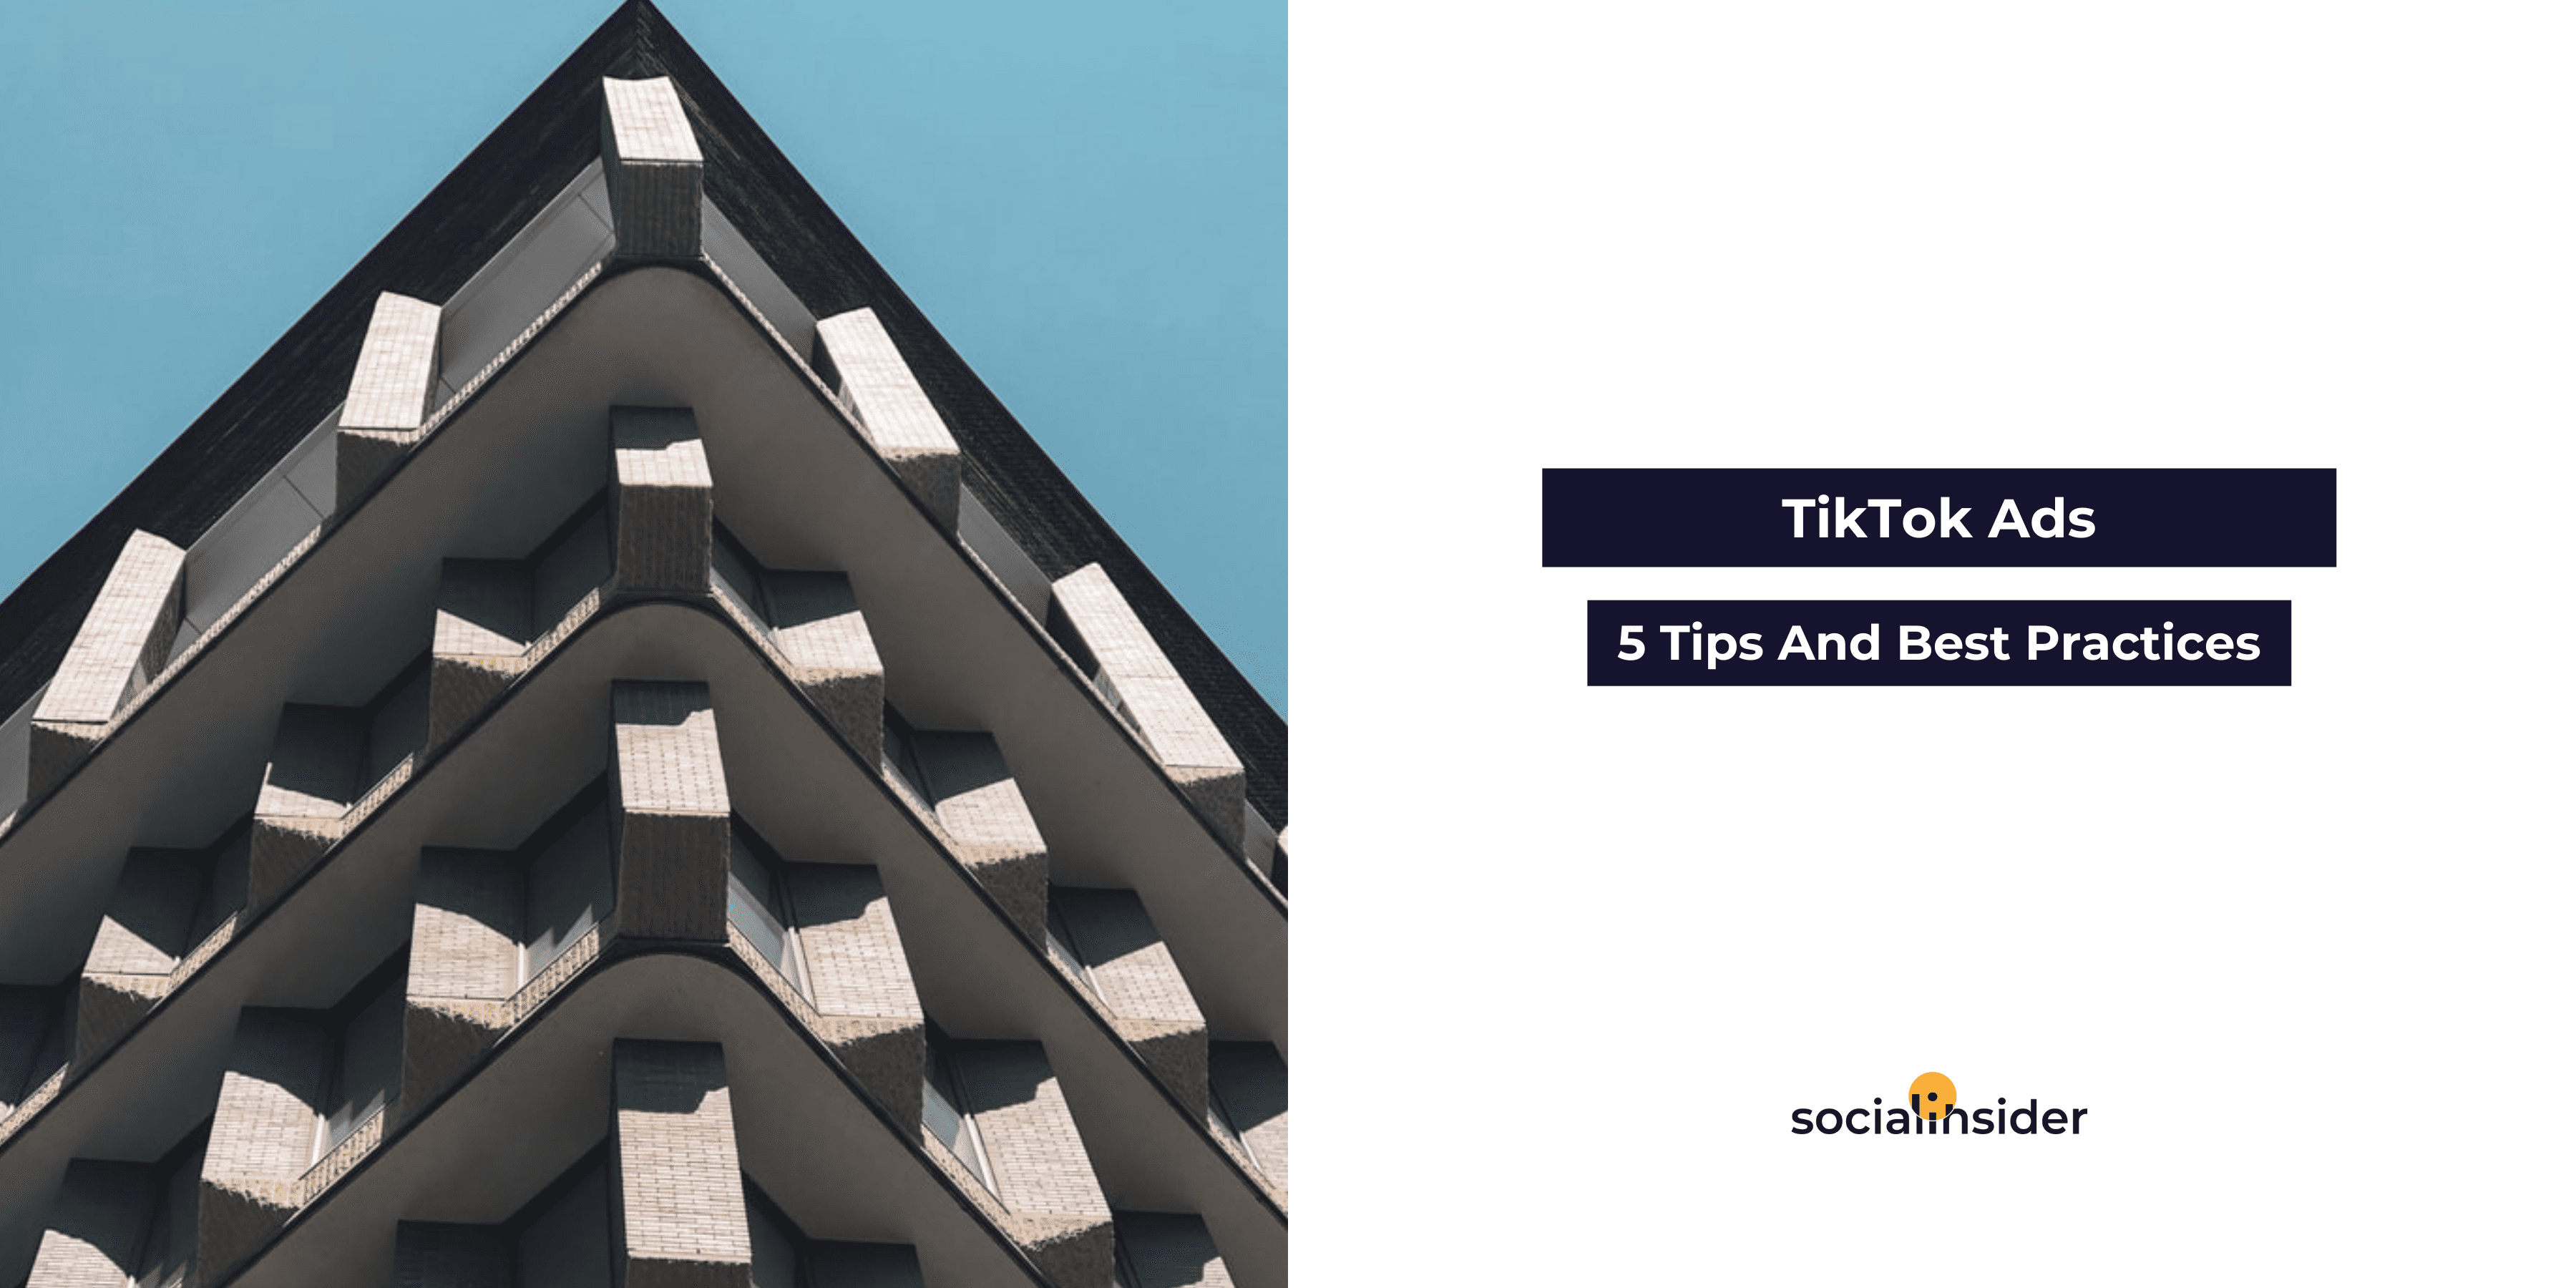 How to Create TikTok Ads And Setup a Campaign That Converts: 5 Tips And Best Practices